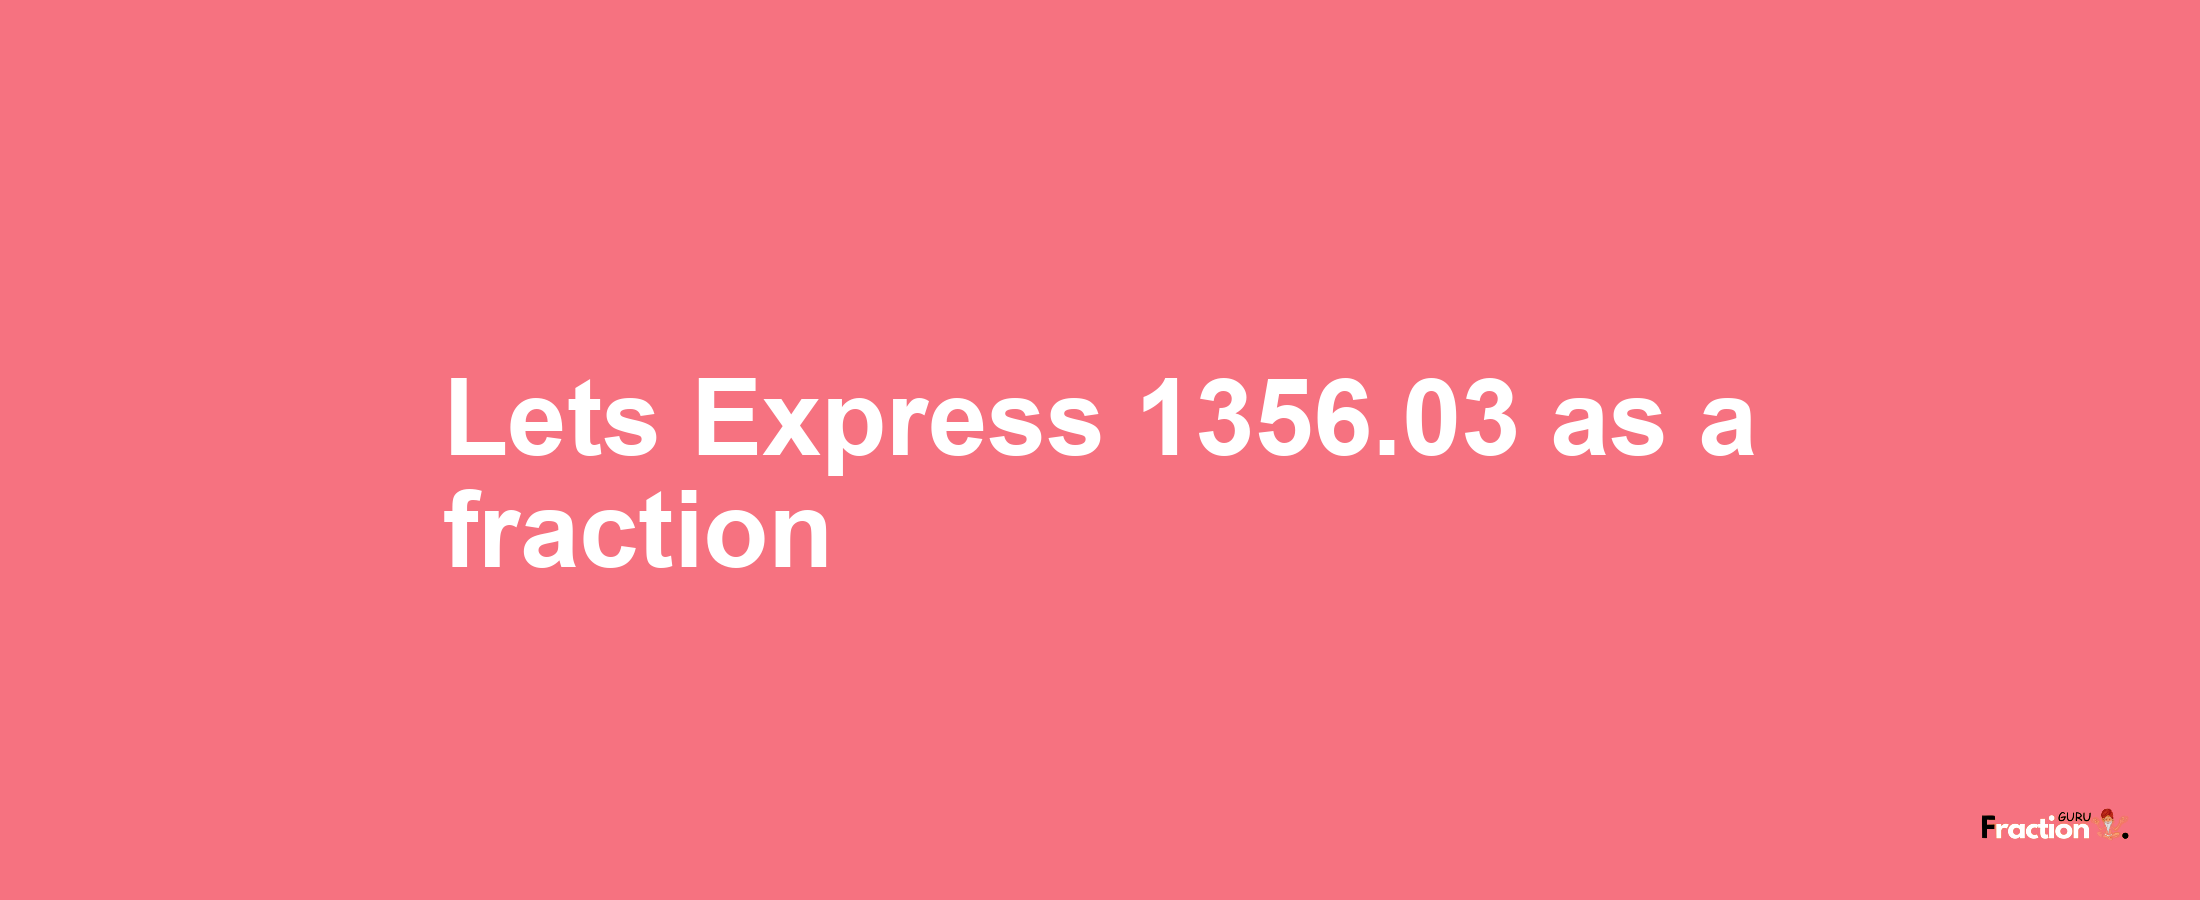 Lets Express 1356.03 as afraction